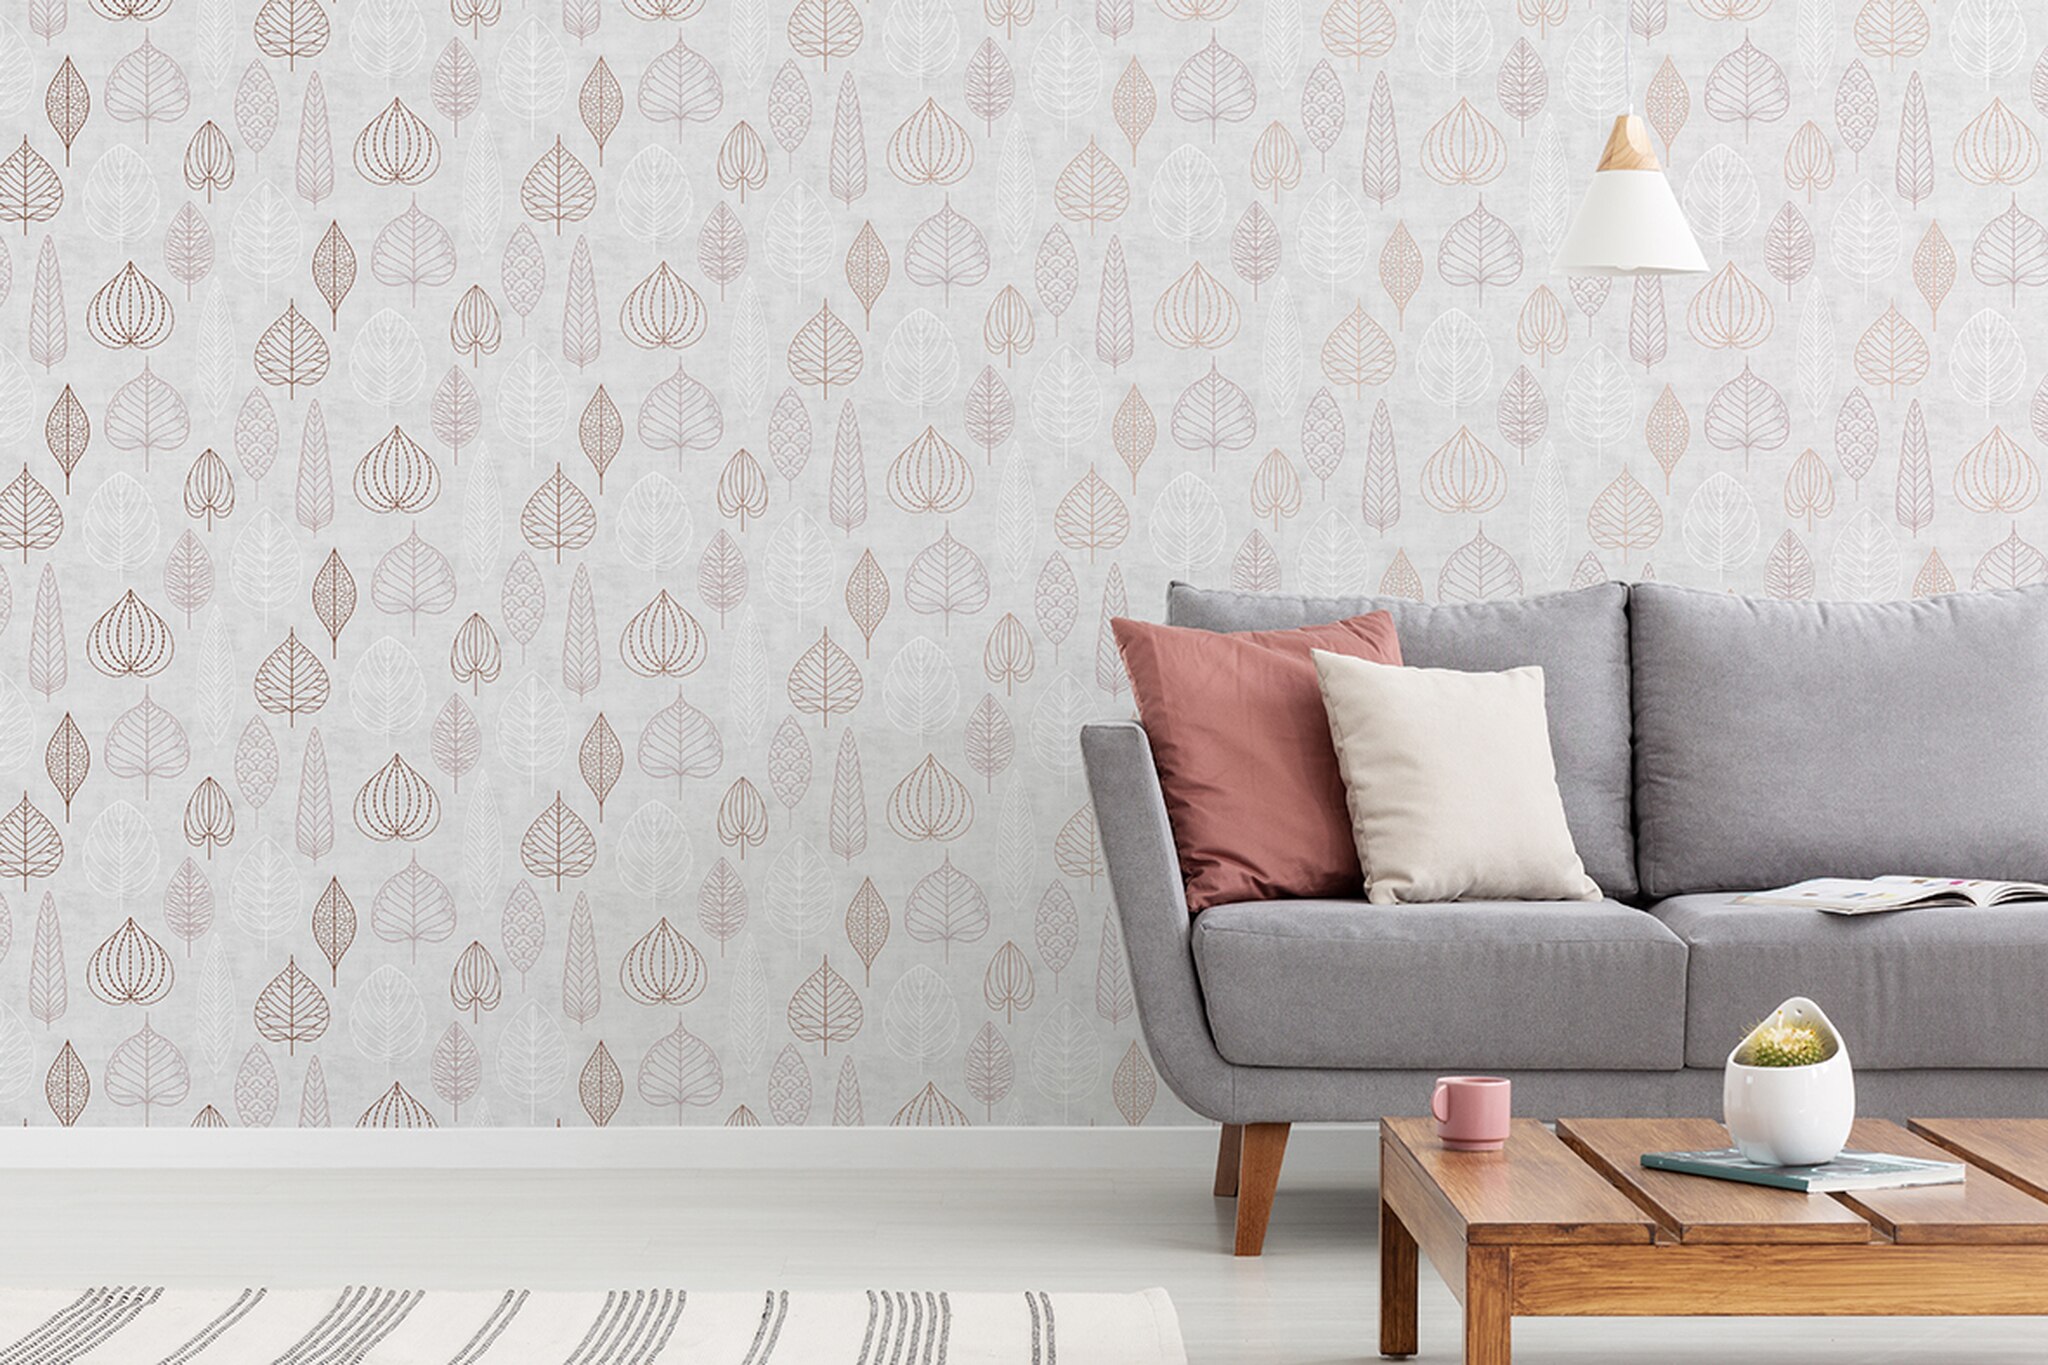 Nordic Leaf Rose Gold Wallpaper - Living Room White Wall With Green Plants - HD Wallpaper 